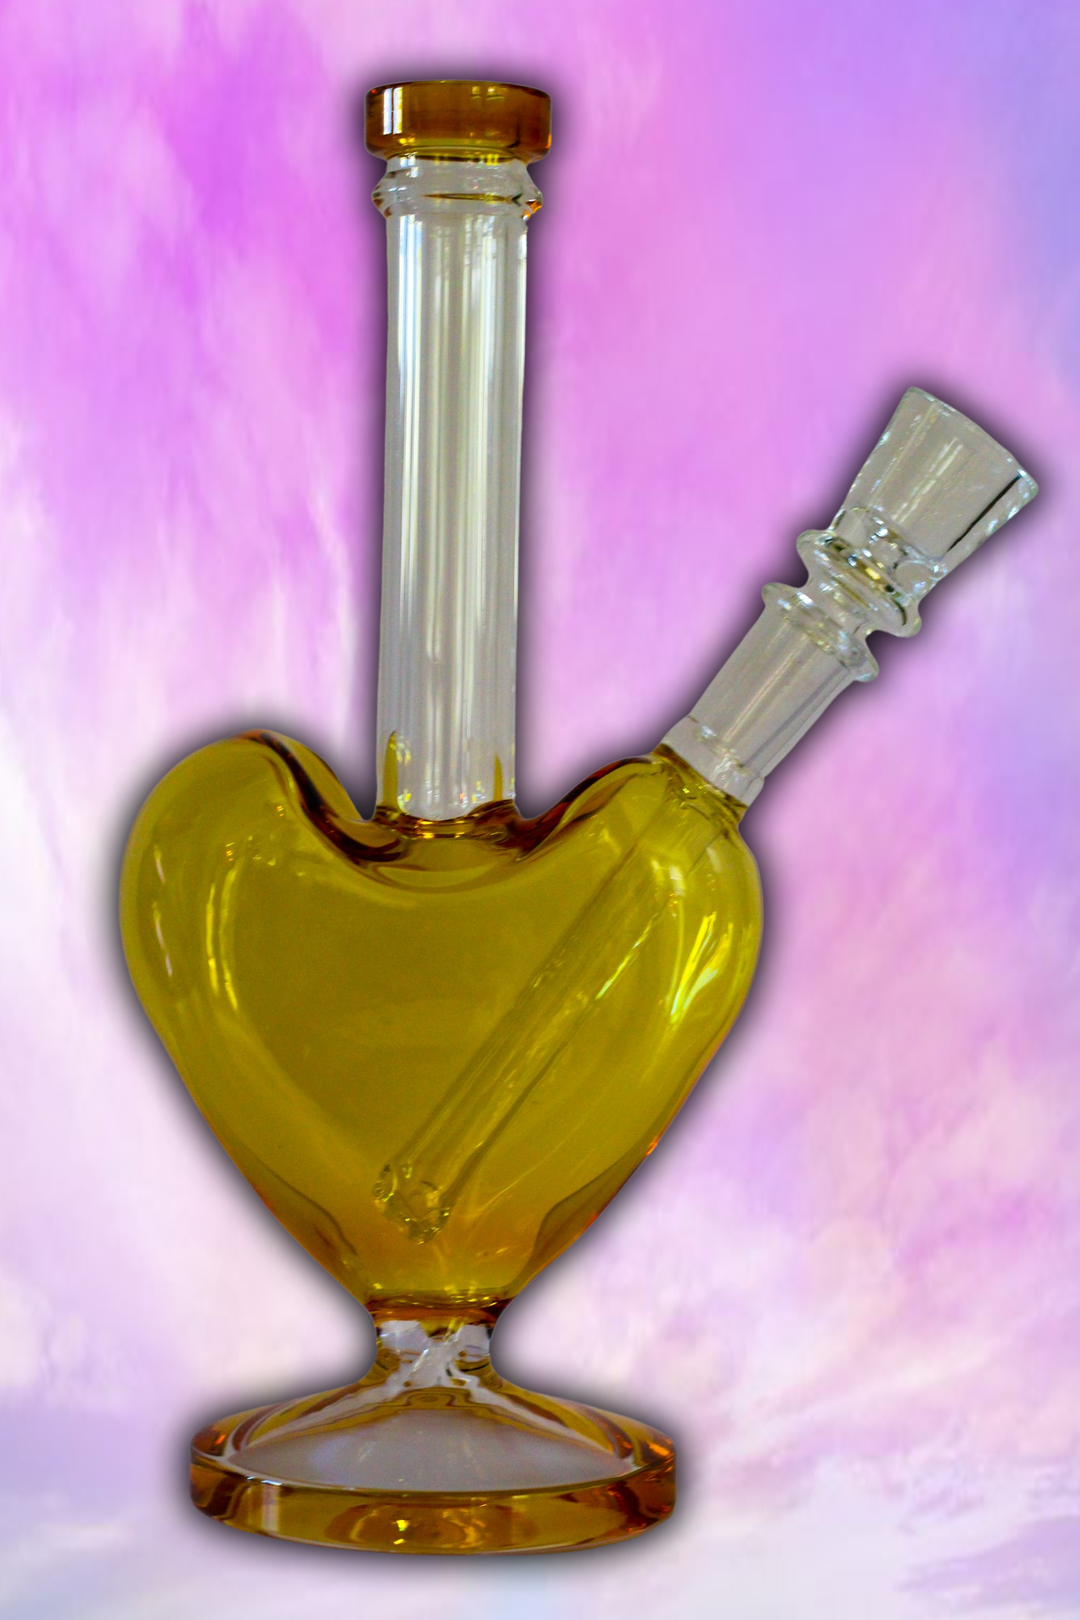 Lonely Hearts Club Bong - The SWL Store 